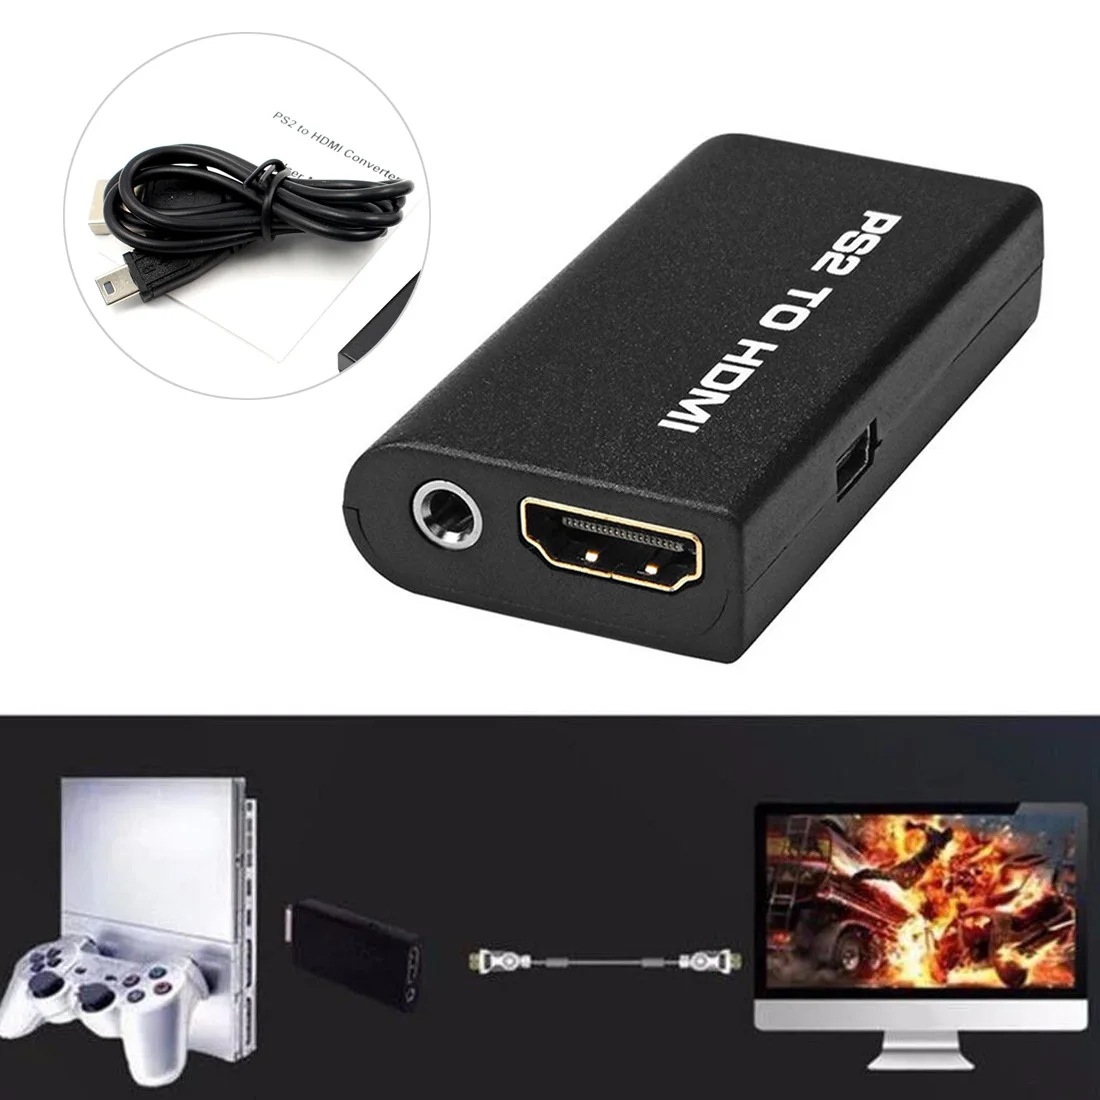 

PS2 to HDMI Audio Video AV Adapter Converter with 3.5mm Audio Output for HDTV